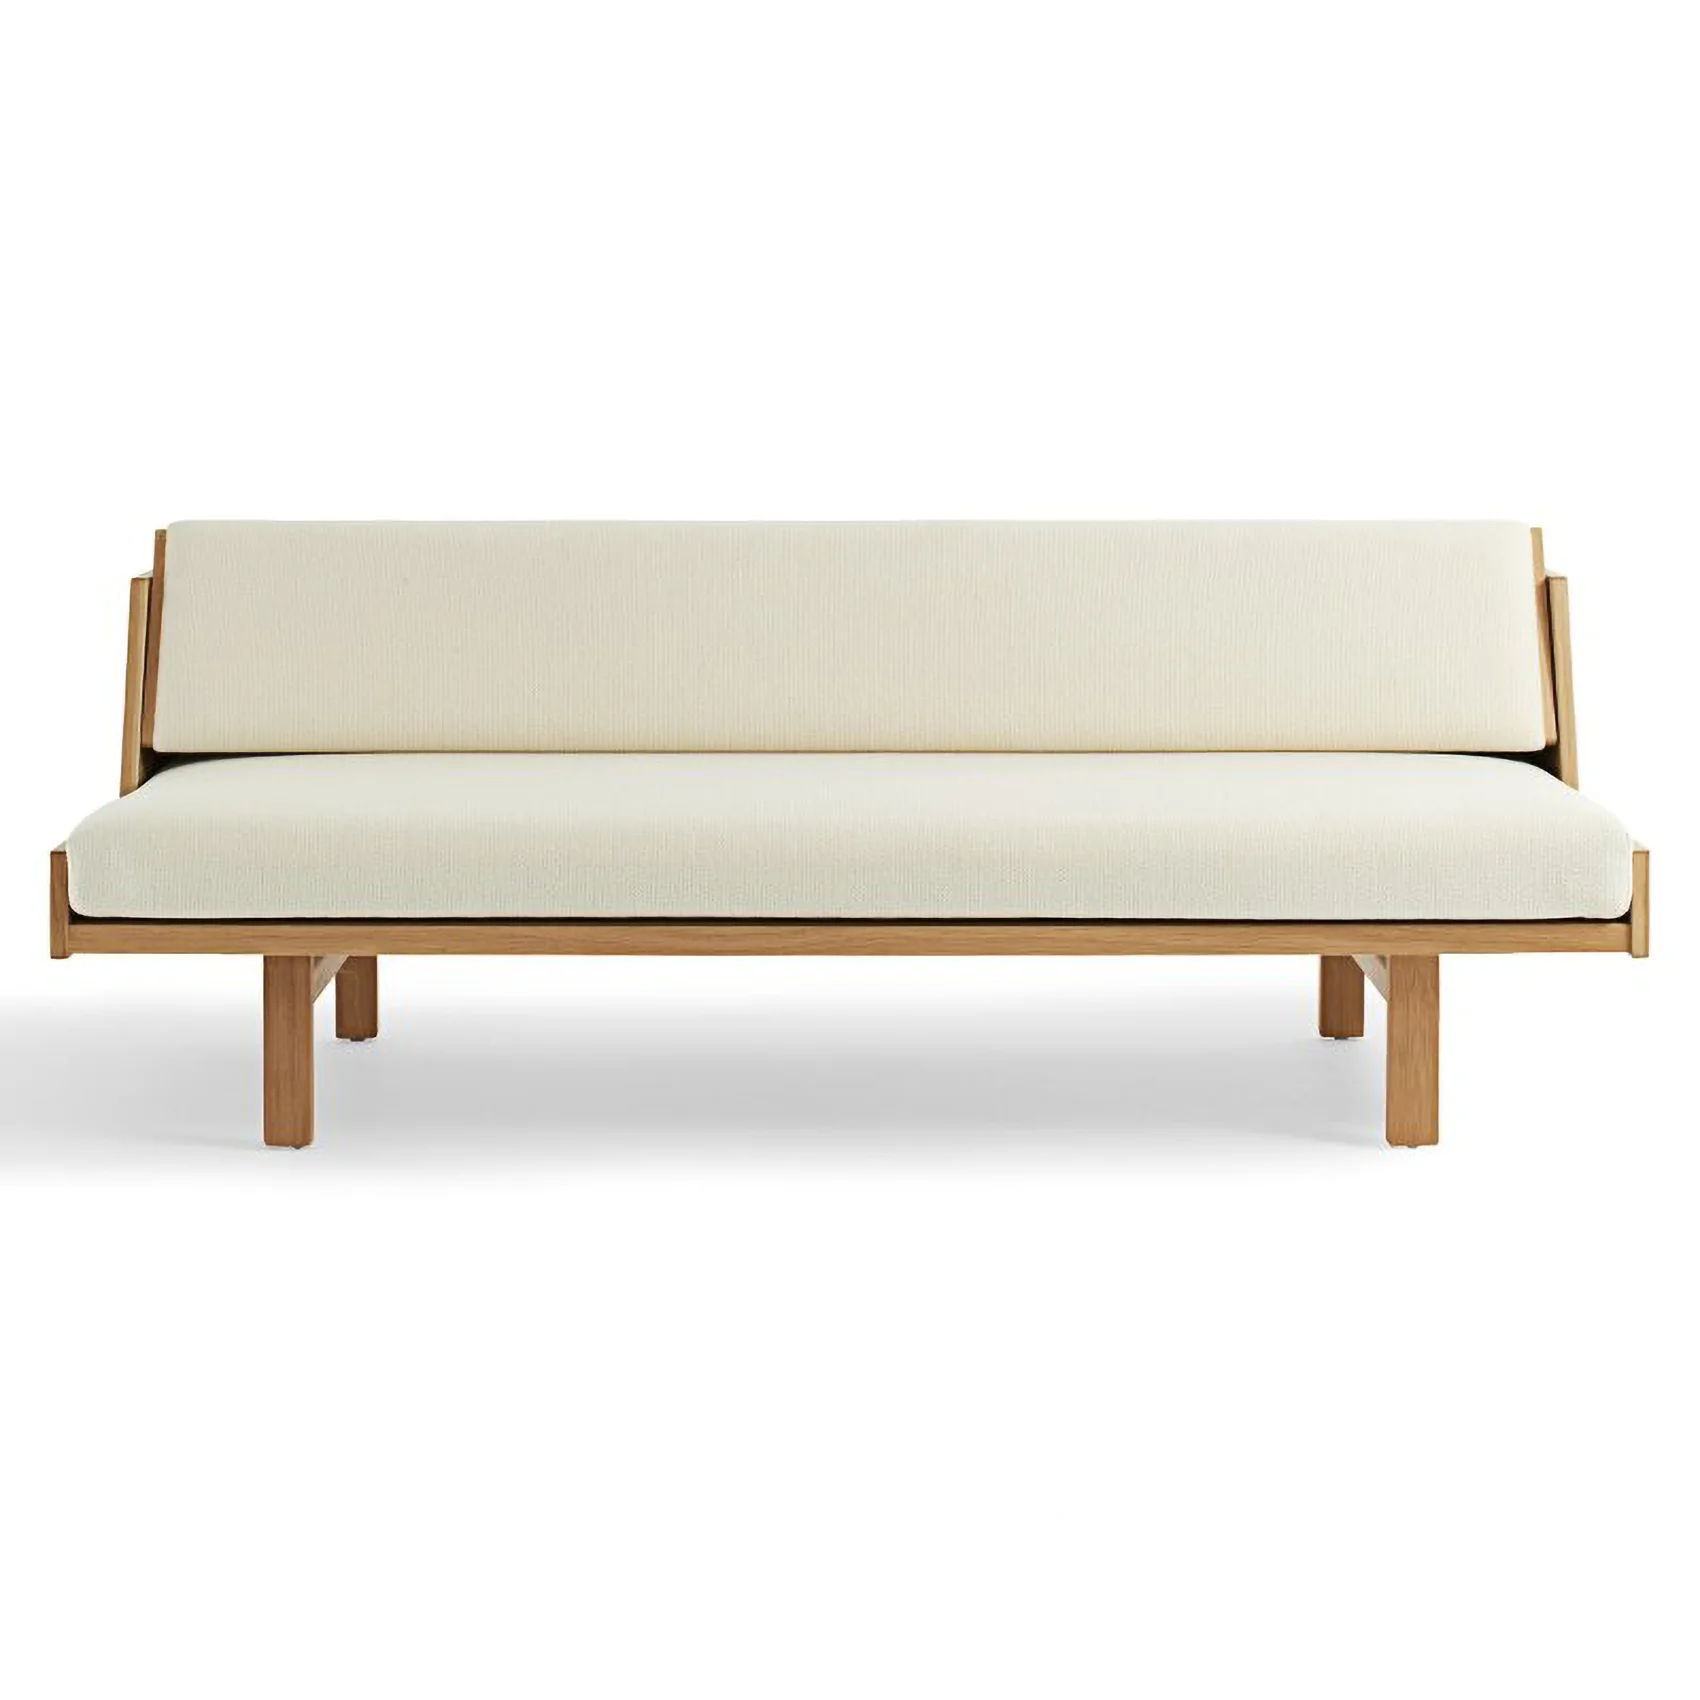 GETAMA "GE258 Daybed" Beech Lacquer